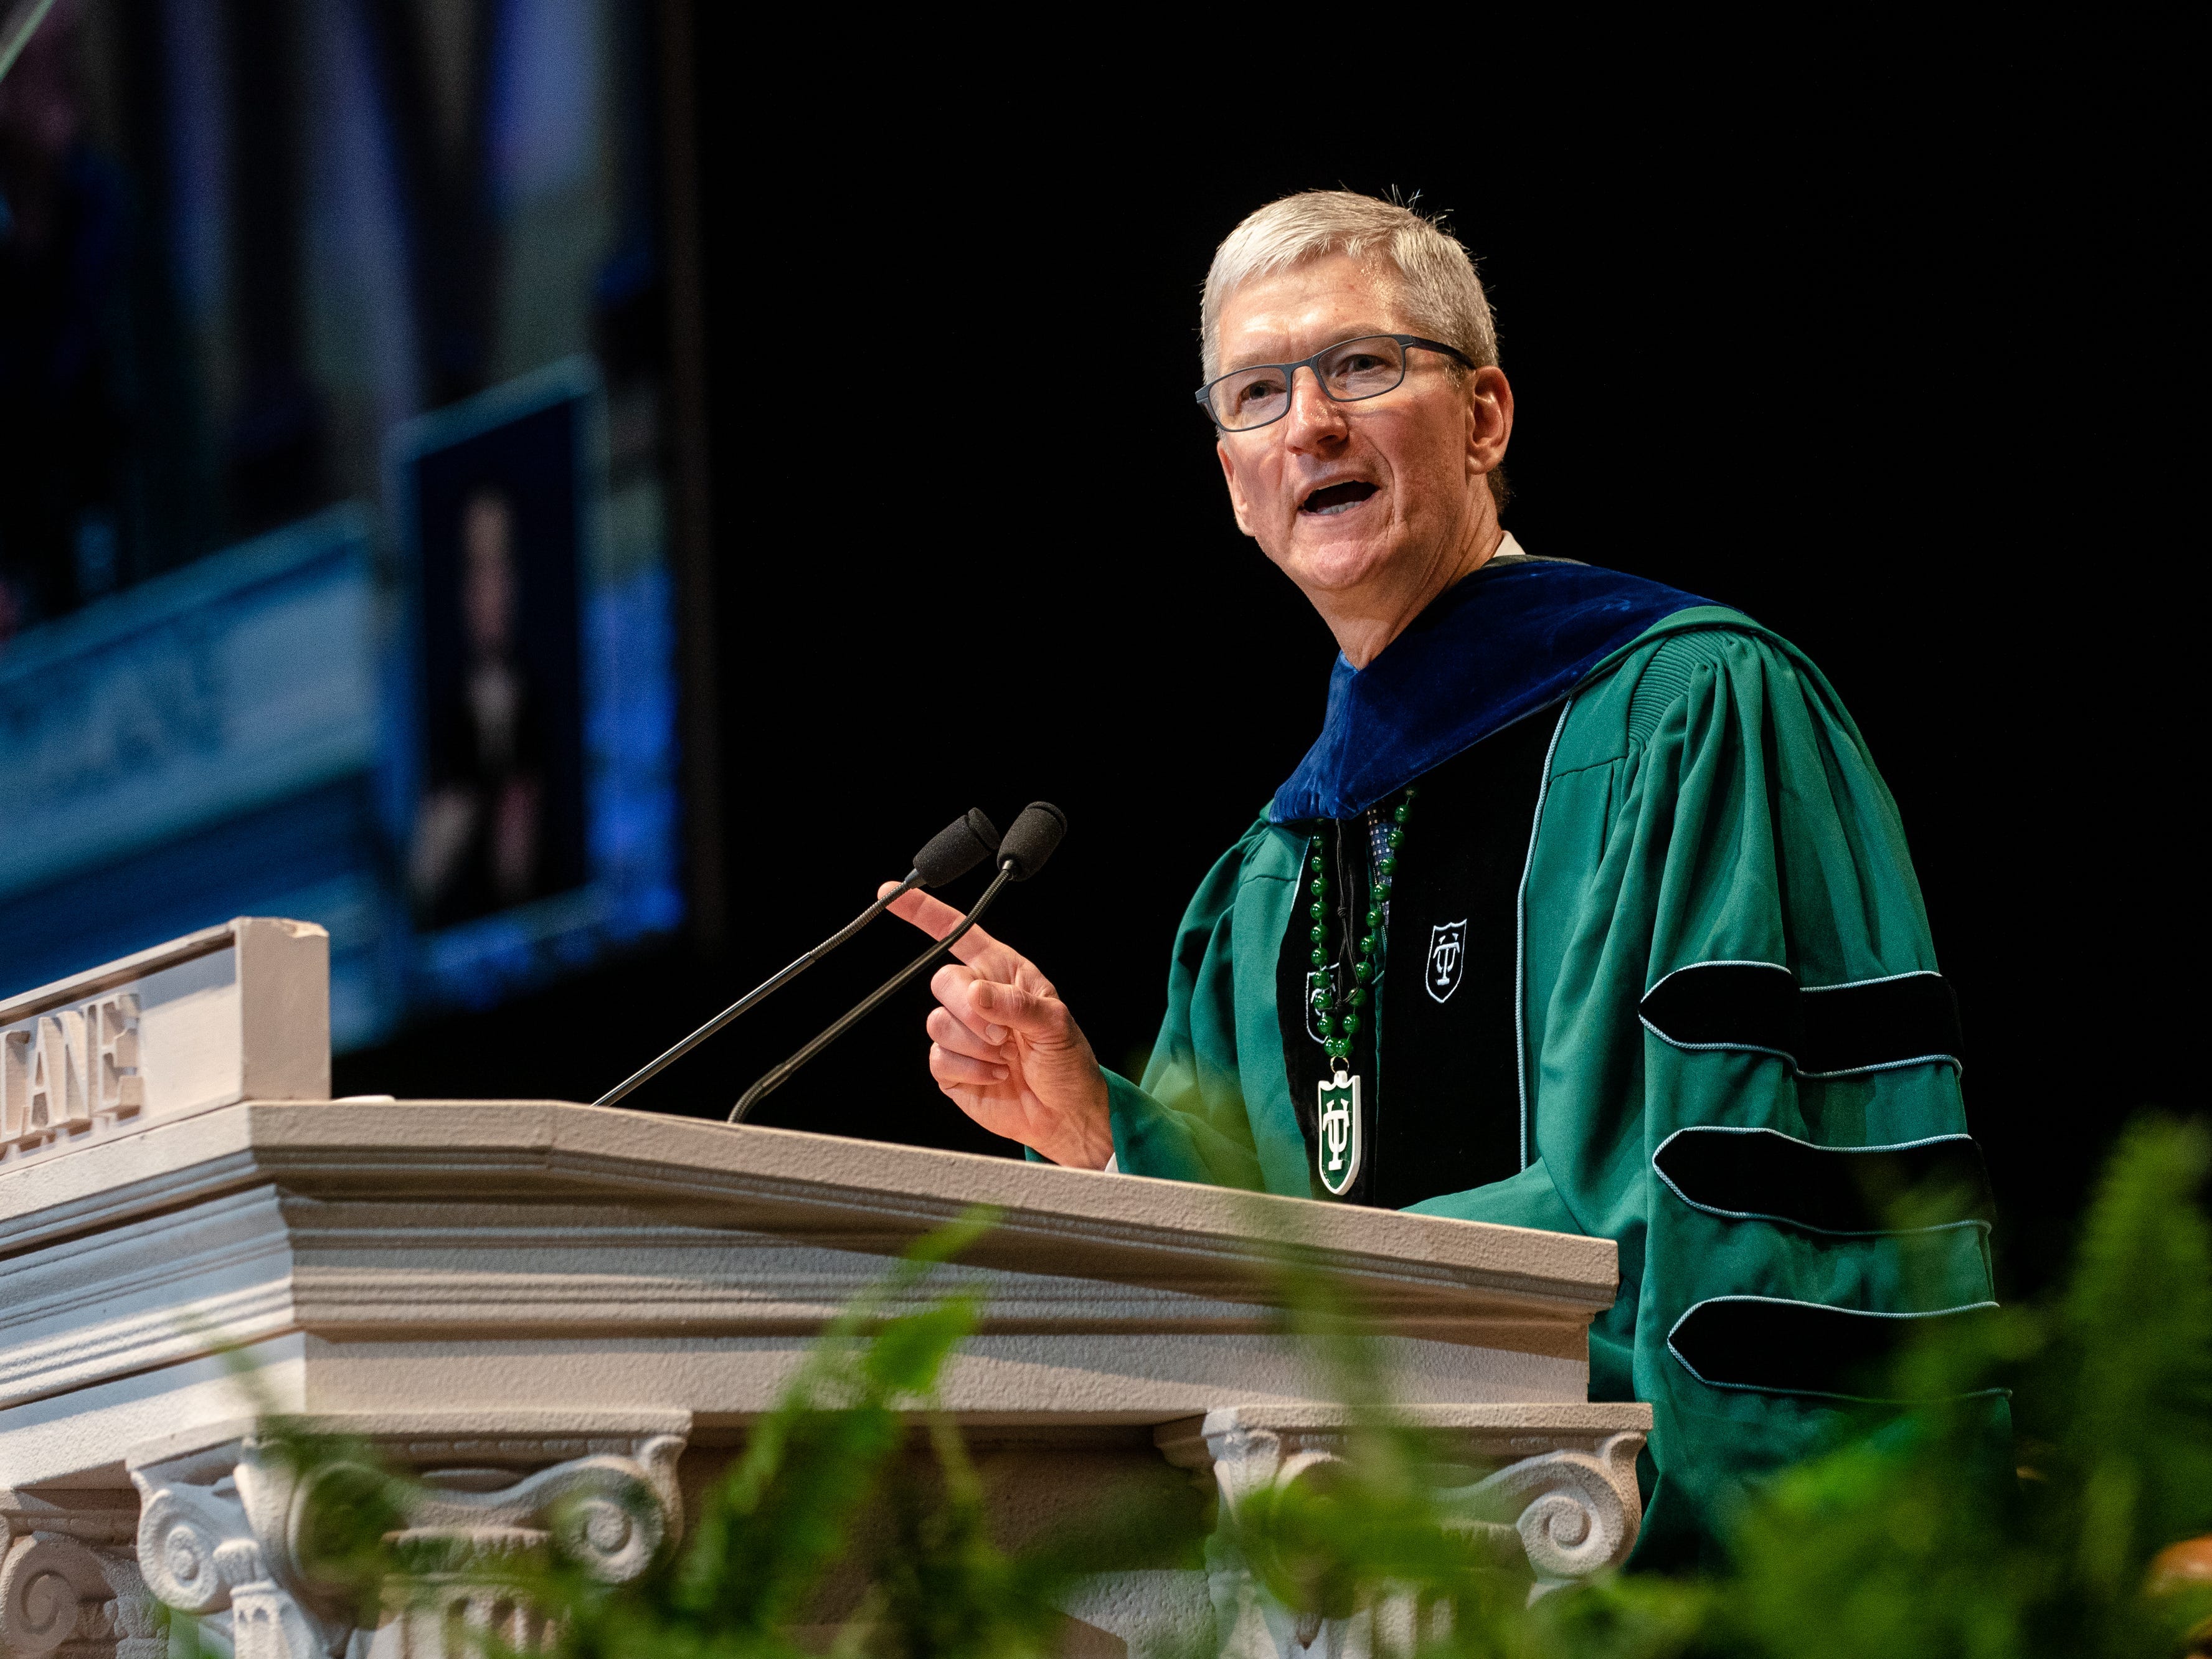 <ul class="summary-list"> <li>Most commencement speeches tend to follow a similar formula.</li> <li>However, some are so inspiring they are remembered long after graduation.</li> <li>Presidents, Nobel Prize winners, CEOs, and comedians have all inspired graduates with their words.</li> </ul><p><a href="https://www.businessinsider.com/bill-gates-michelle-yeoh-memorable-quotes-commencement-speech-graduation-2023-5">Commencement speeches</a> are often an opportunity for media moguls, celebrities, and CEOs to impart wisdom to the graduating classes of colleges and universities across the country. </p><p>Presidents have also used commencement speeches as more casual environments to drive home the values of their administrations, such as John F. Kennedy's 1963 speech at American University that called for peace. </p><p>Here are valuable pieces of advice from graduation speeches through history.</p><p><em>Richard Feloni and Rachel Gillett contributed to a previous version of this article.</em></p><div class="read-original">Read the original article on <a href="https://www.businessinsider.com/the-best-graduation-speeches-of-all-time-2016-6">Business Insider</a></div>